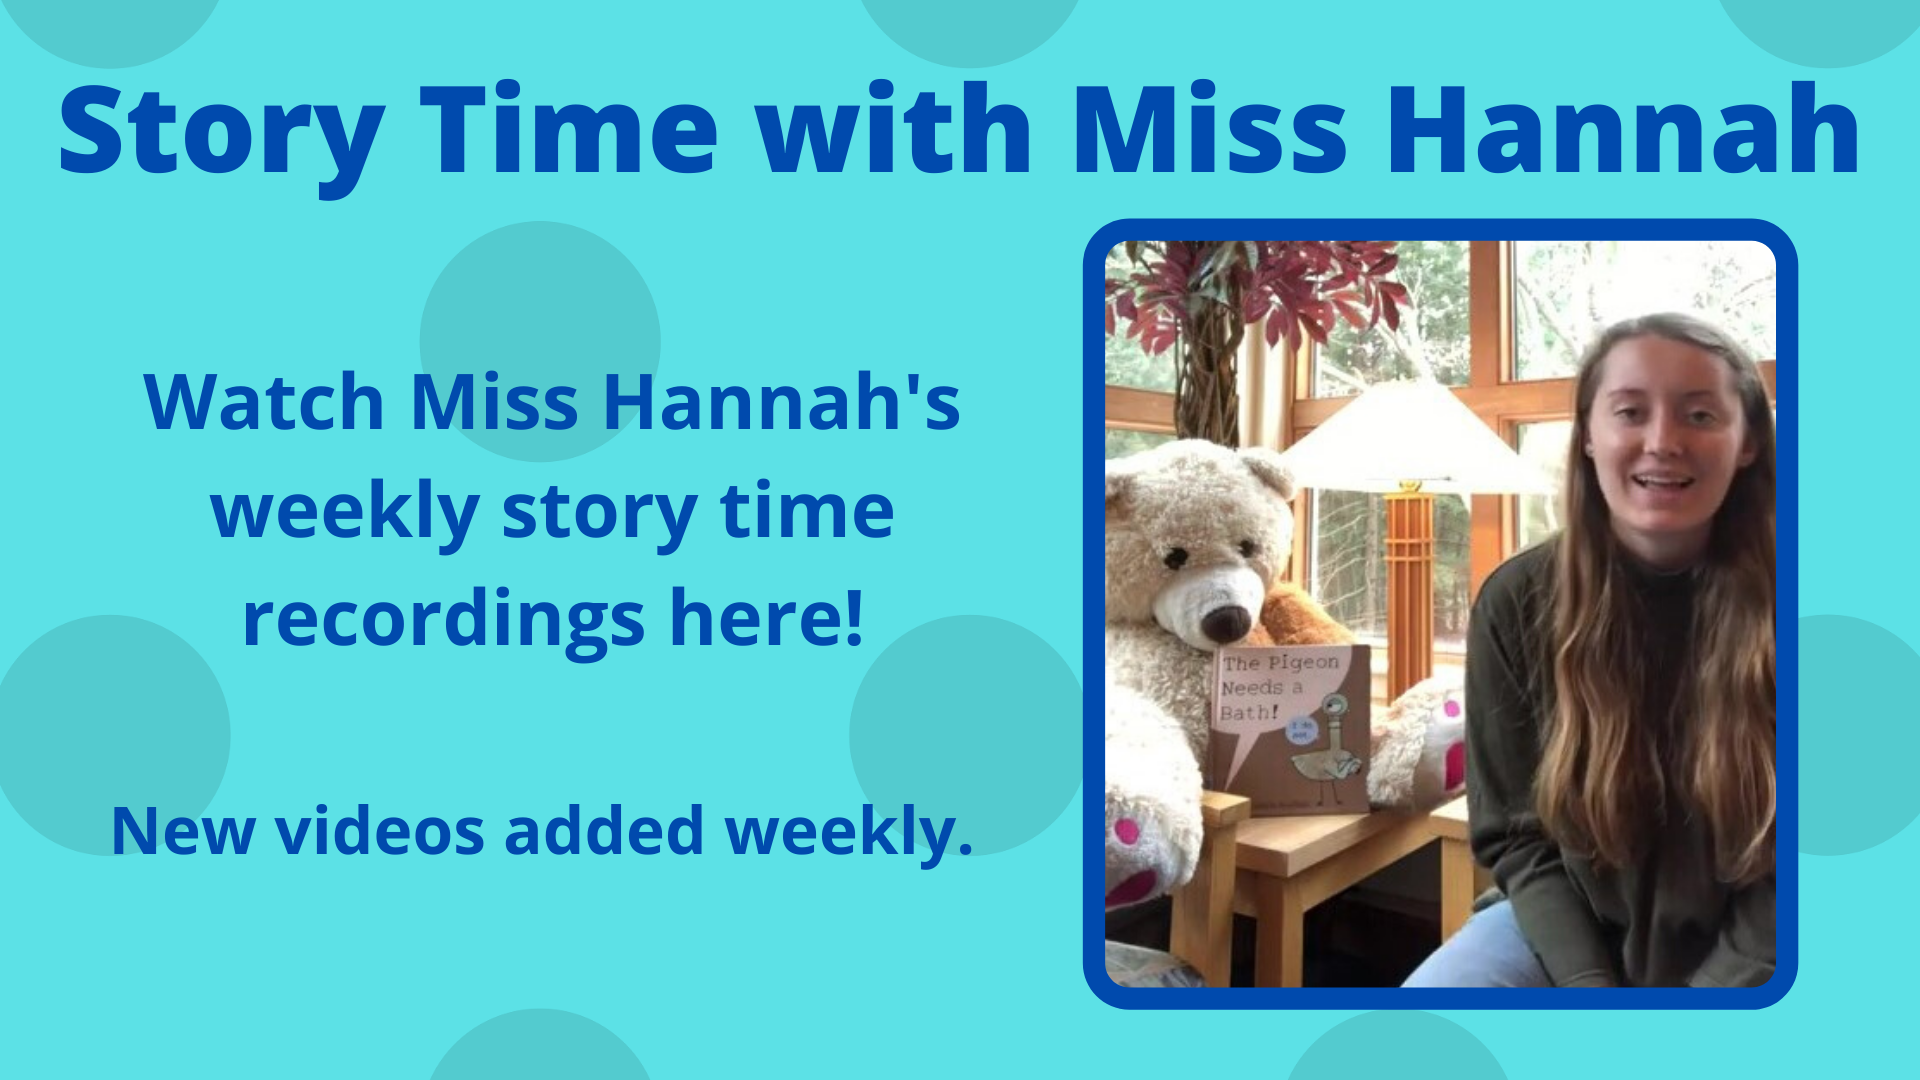 Story Time with Miss Hannah slide